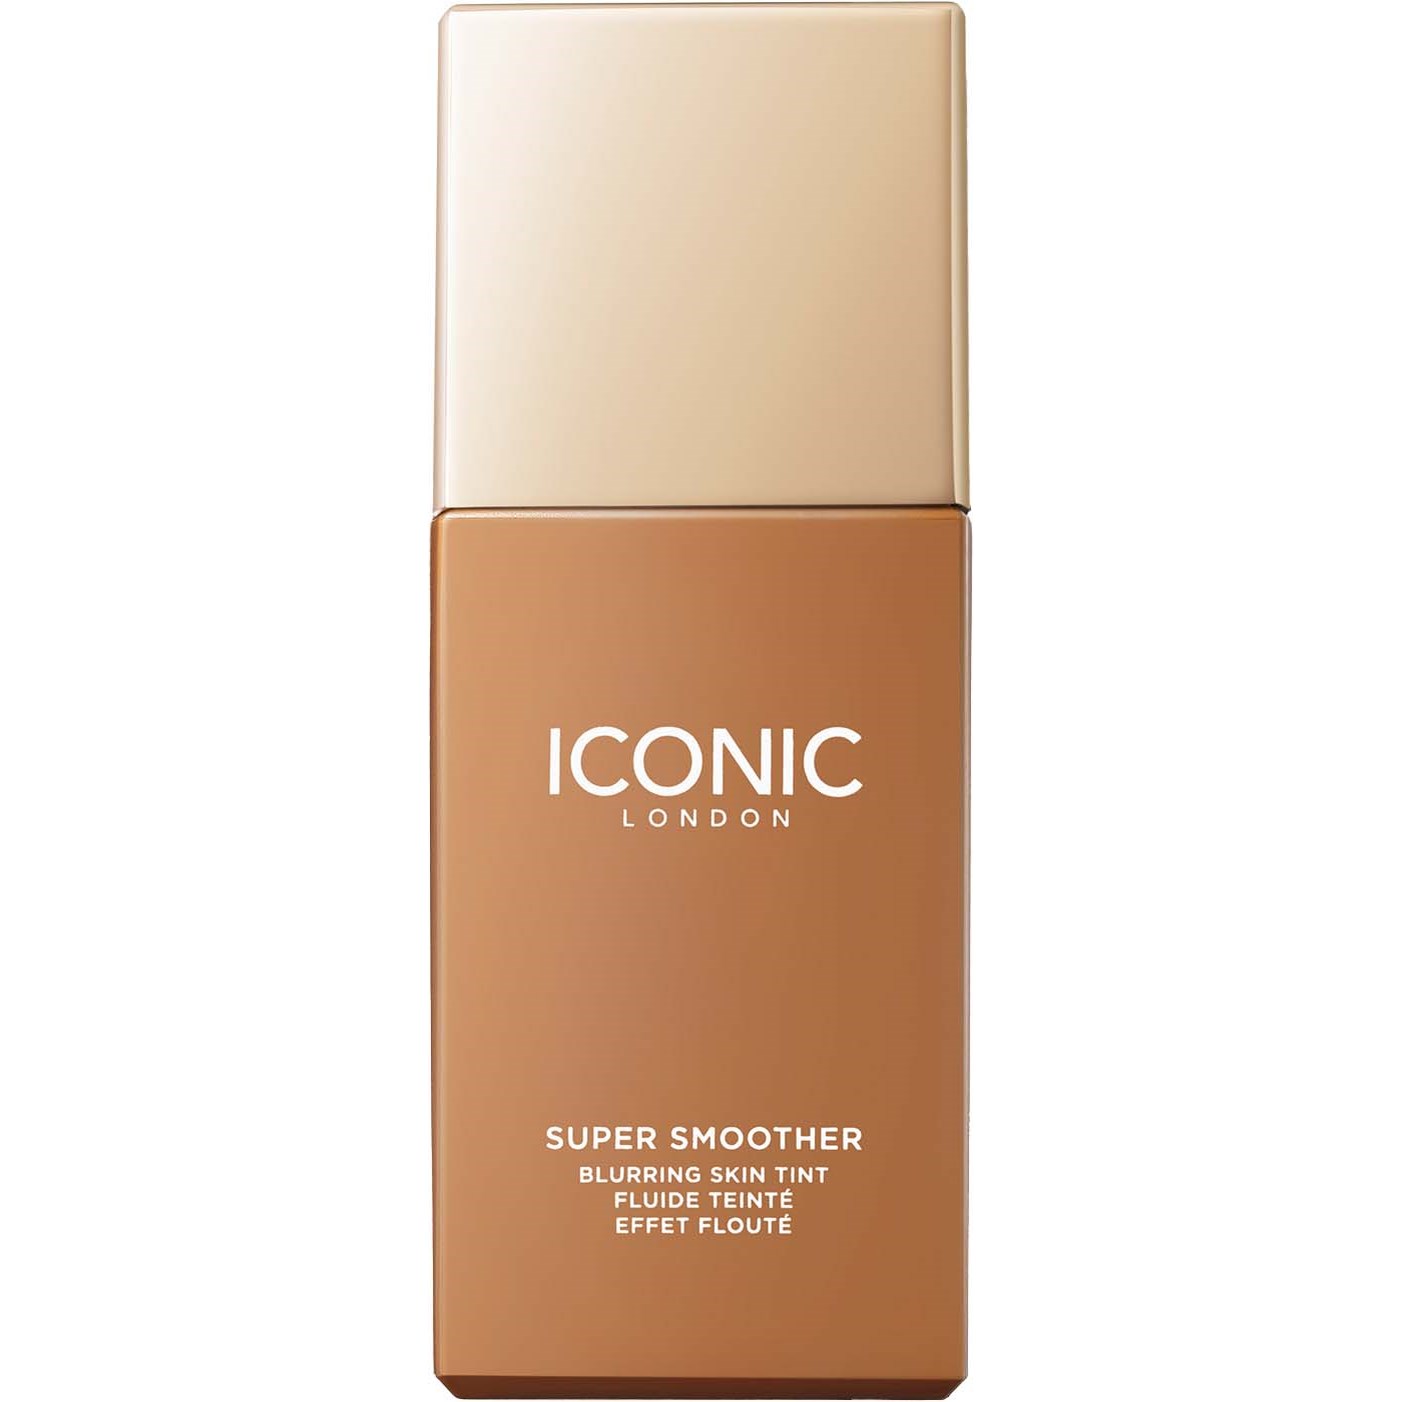 ICONIC London Super Smoother Blurring Skin Tint Neutral Tan